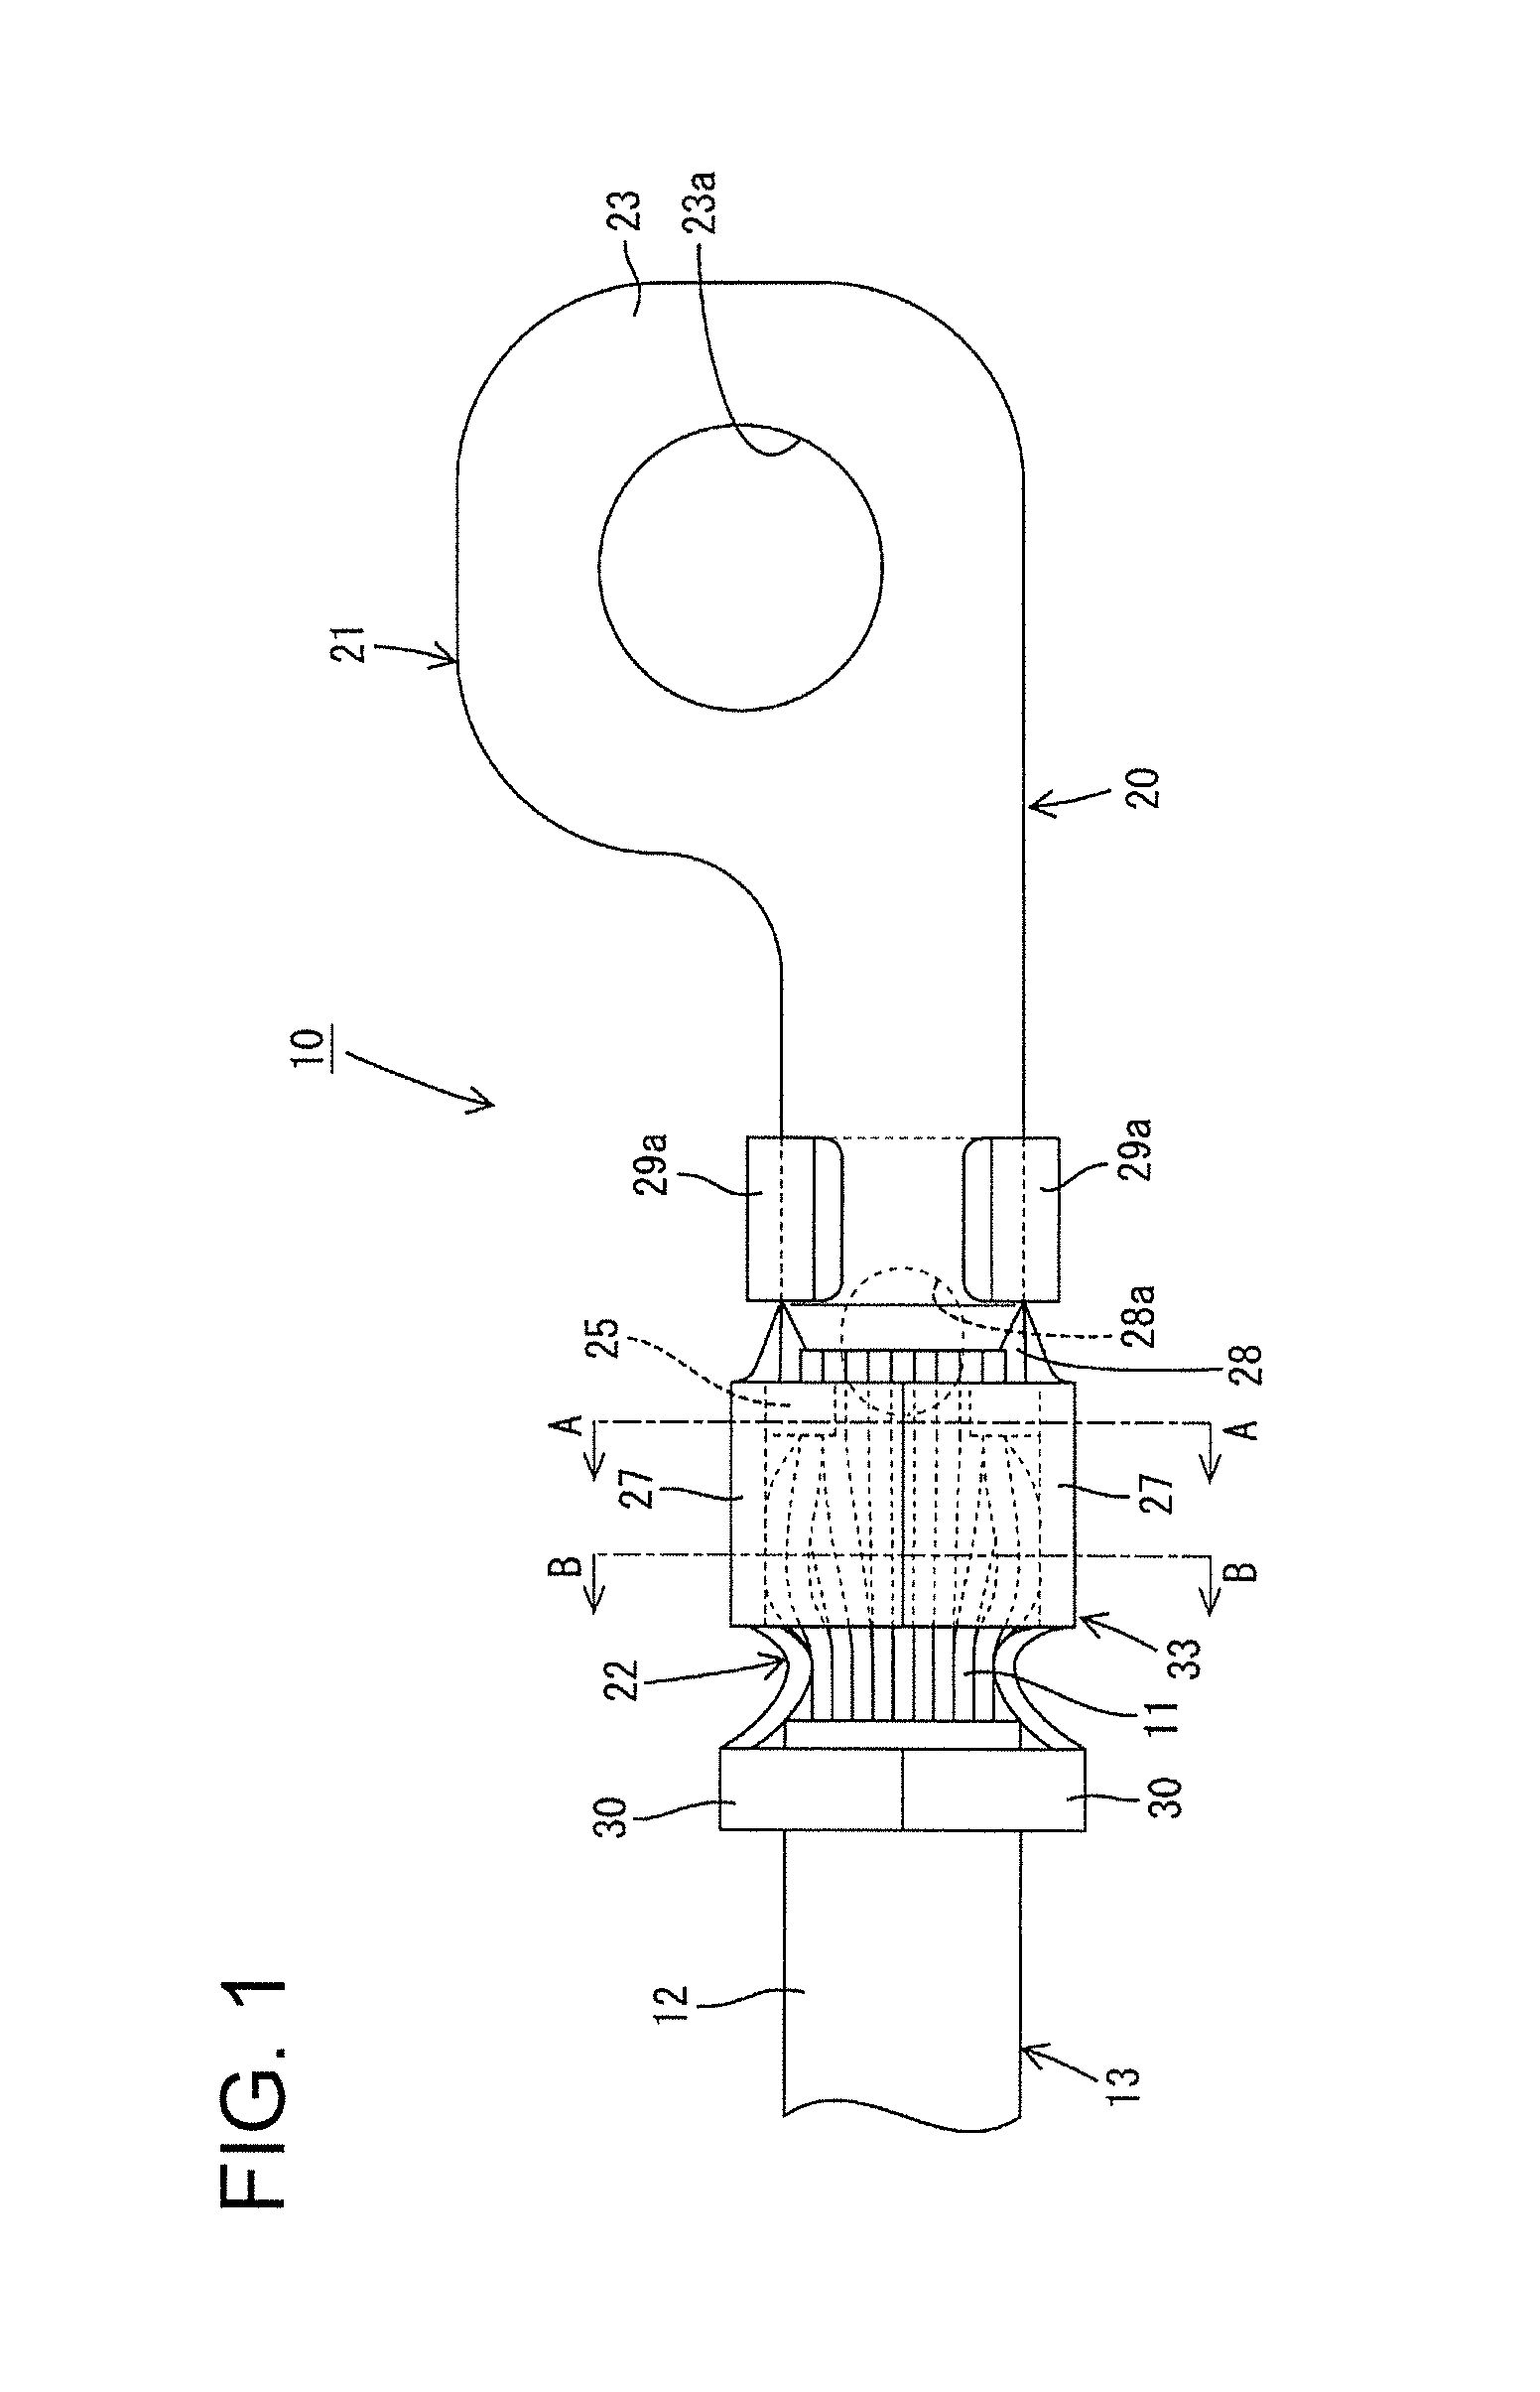 Terminal and terminal-provided wire